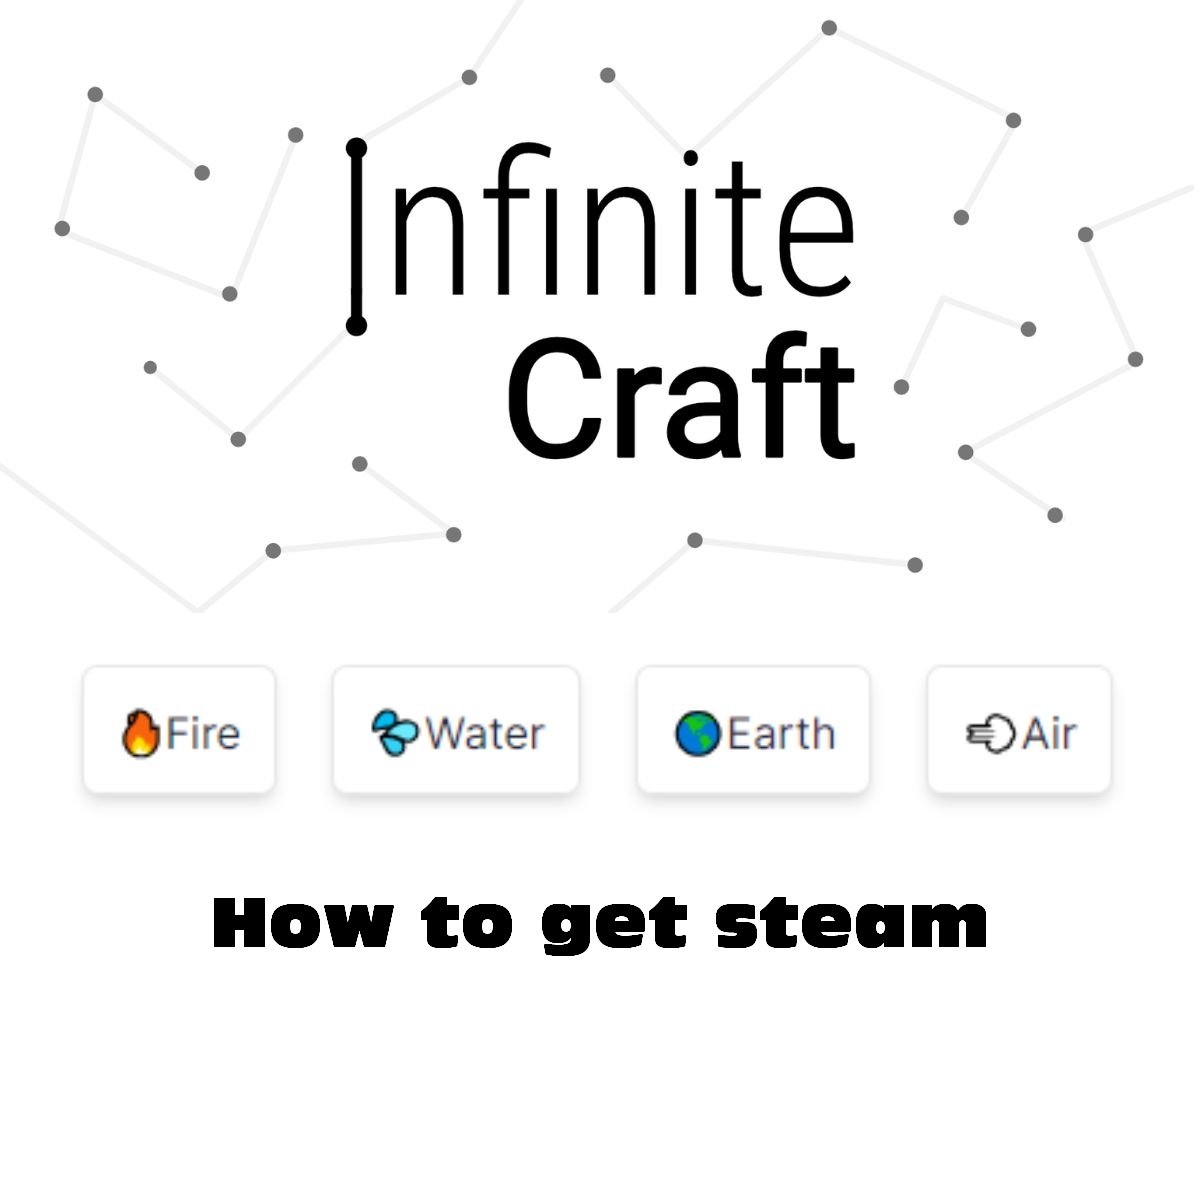 how to get steam in infinite craft